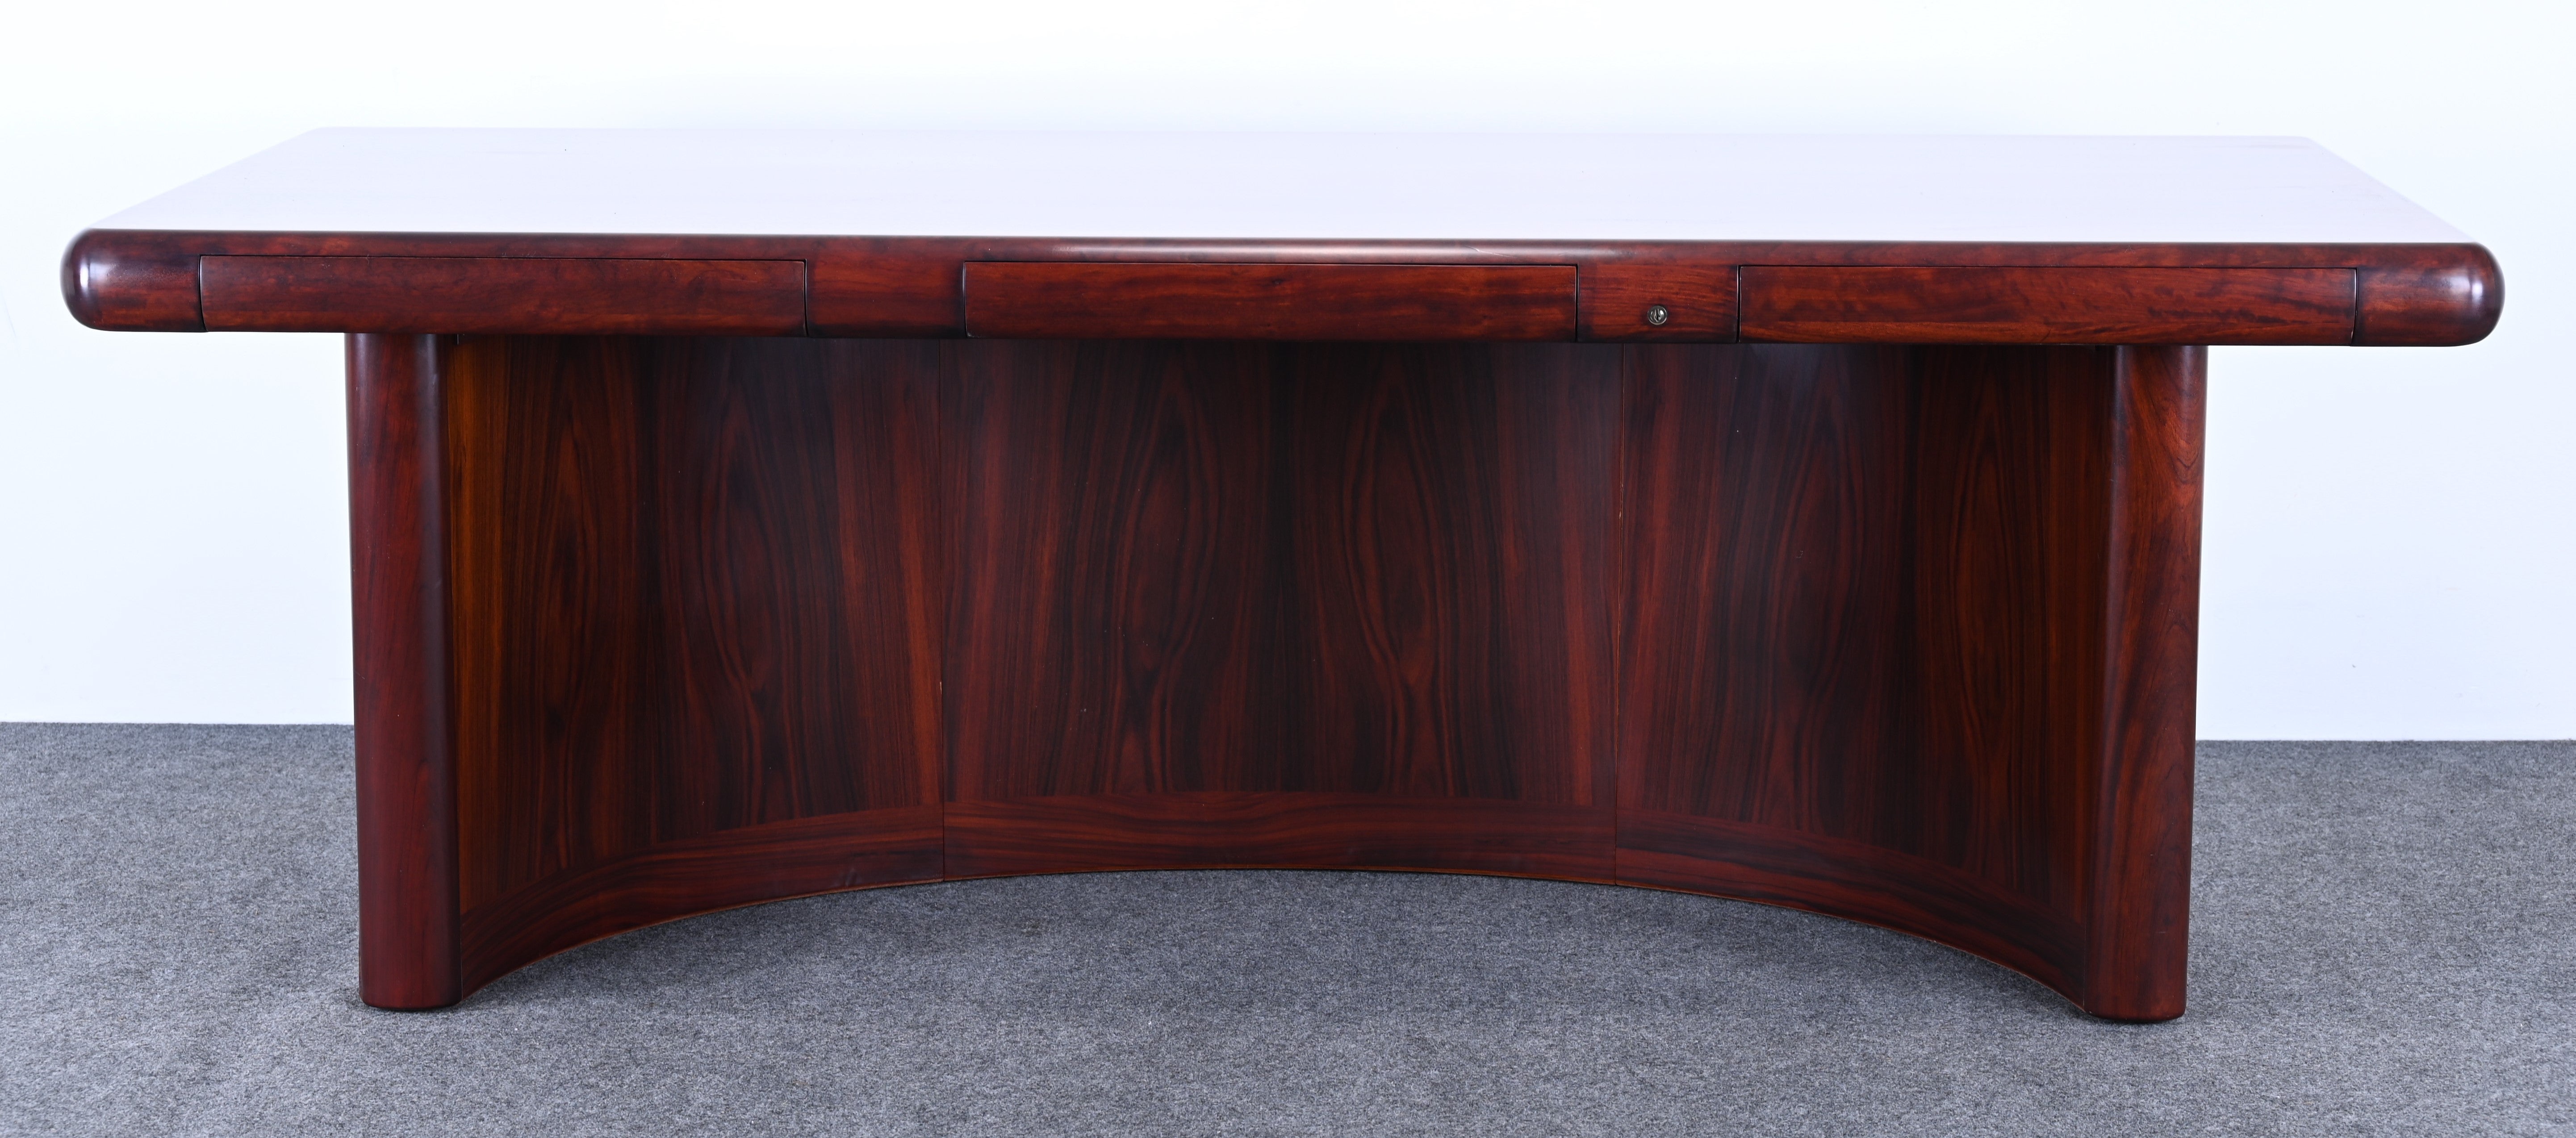 An impressive Mid-Century Modern Danish rosewood executive desk by Dyrlund. The desk has two drawers and a pull-out desktop. The spectacular curved base adds beautiful detail. Would look great in an Executive's work or home office. Structurally